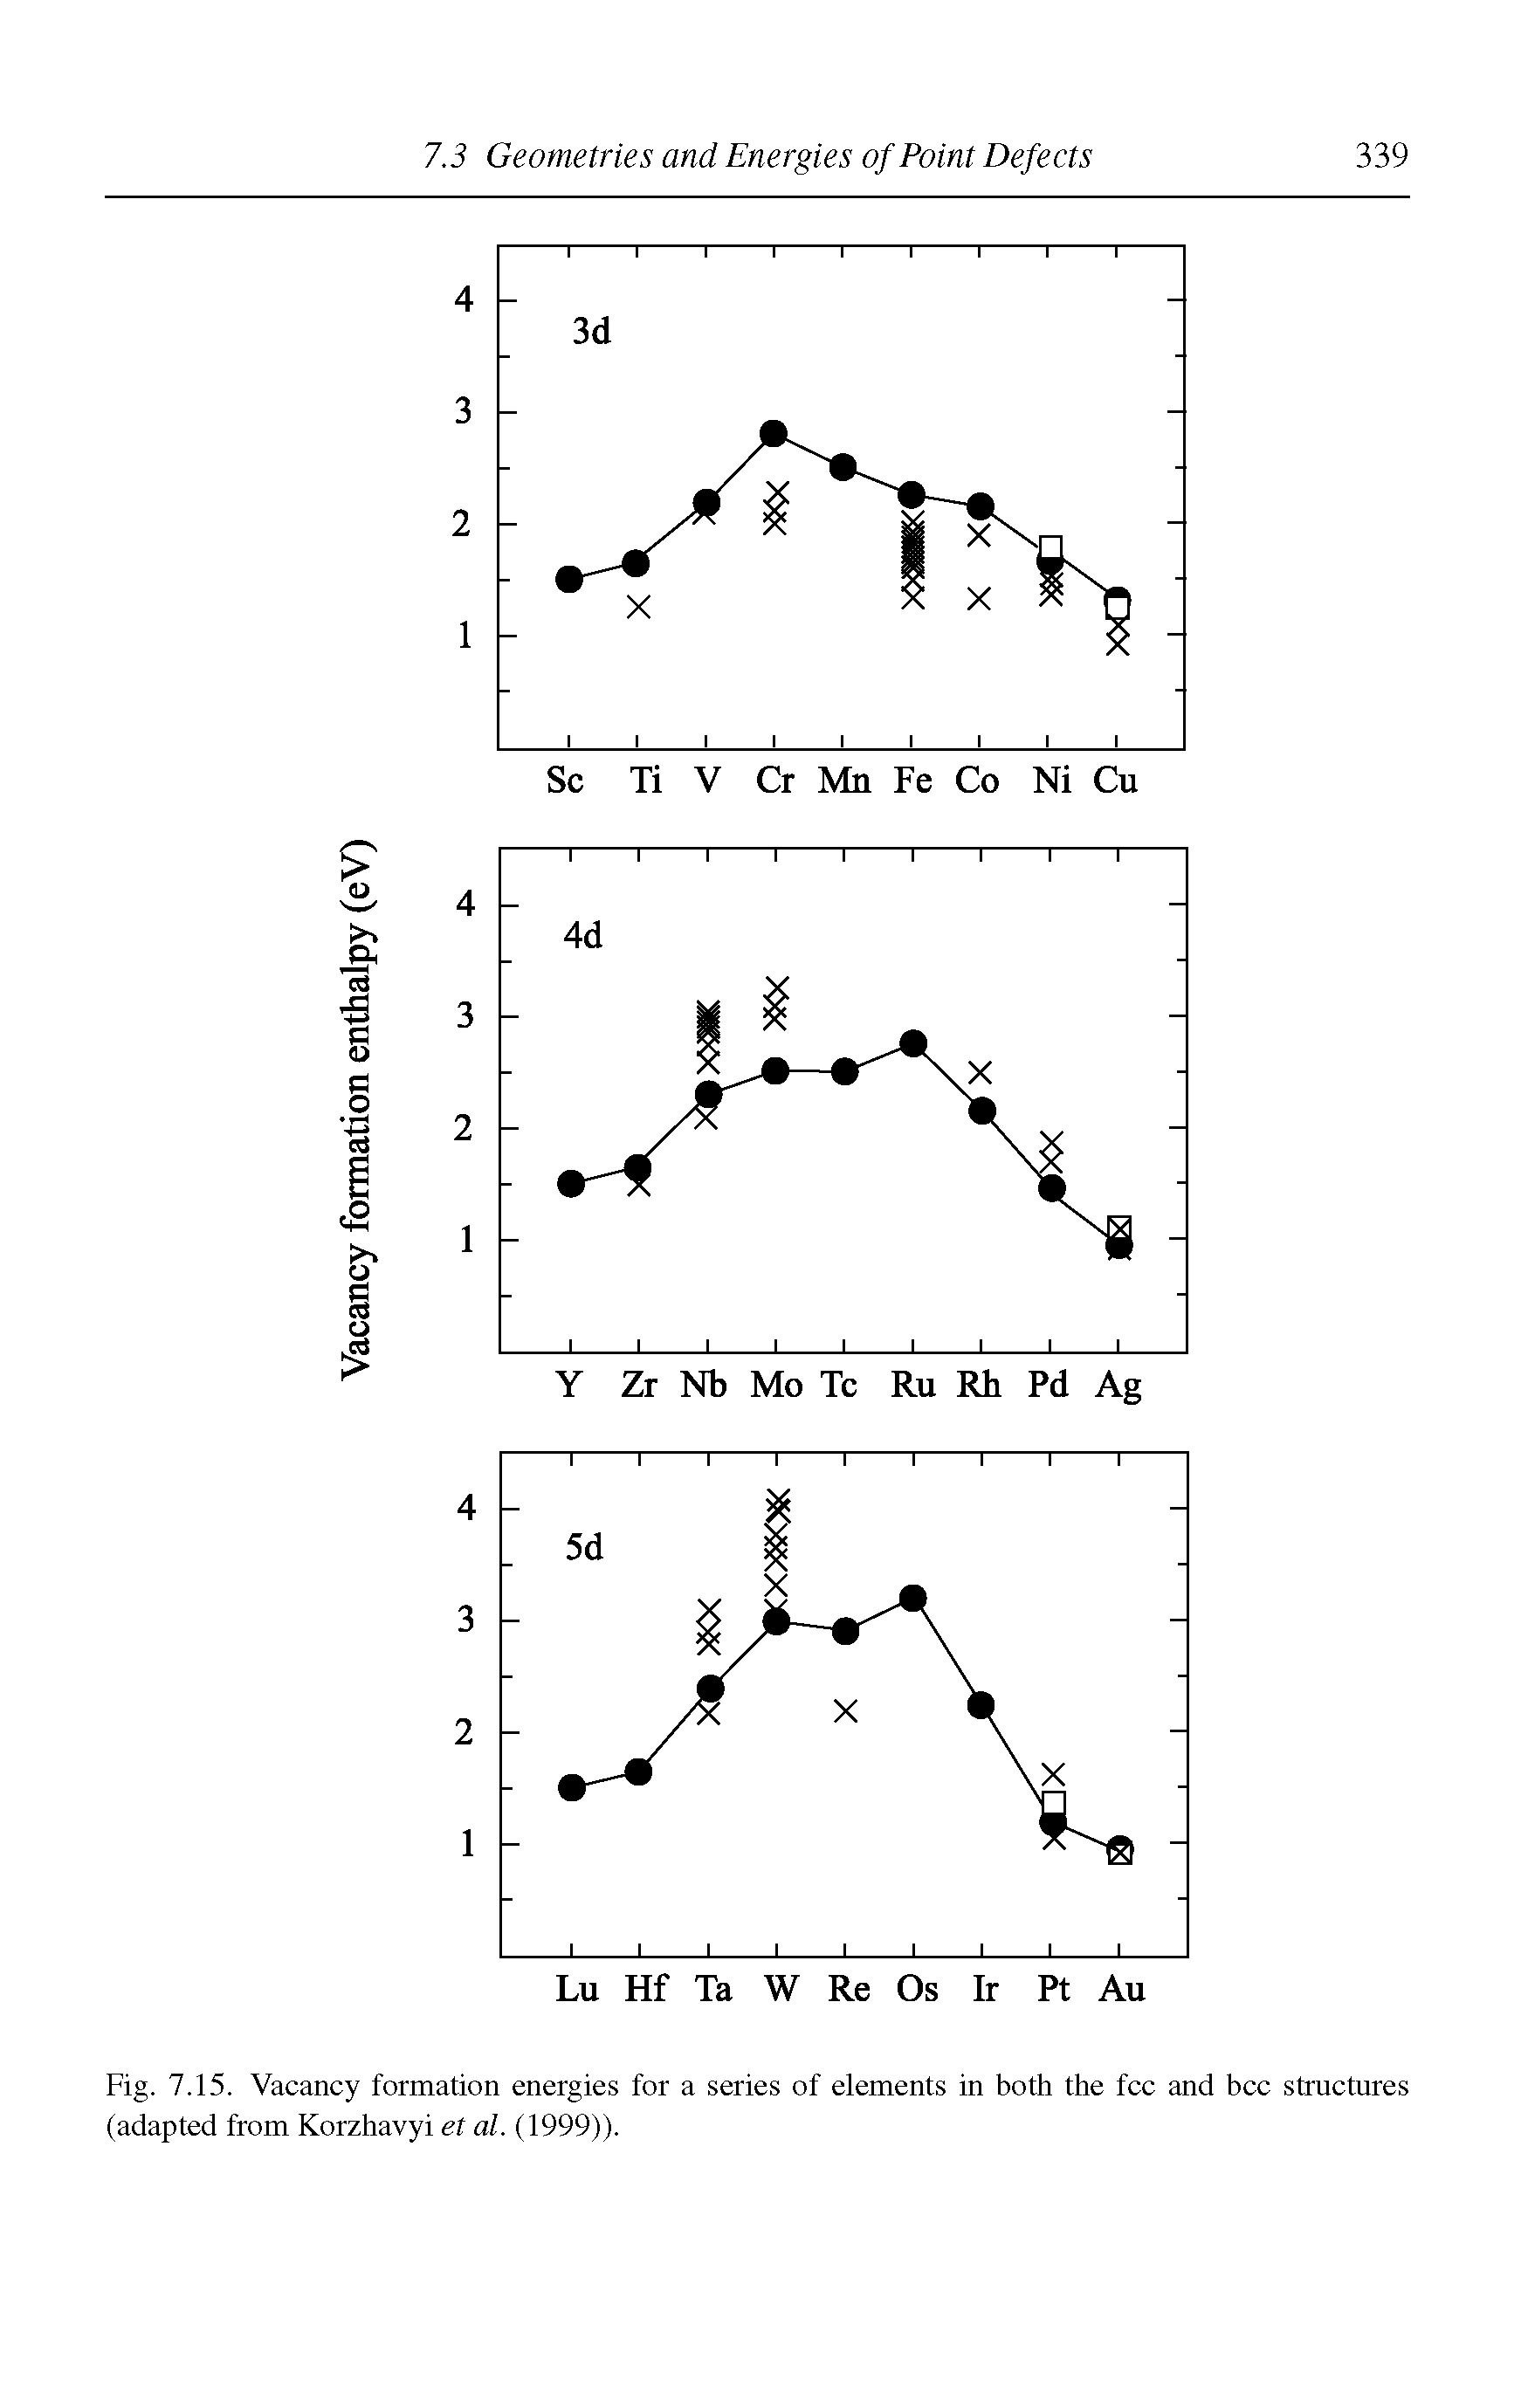 Fig. 7.15. Vacancy formation energies for a series of elements in both the fee and bee structures (adapted from Korzhavyi et al. (1999)).